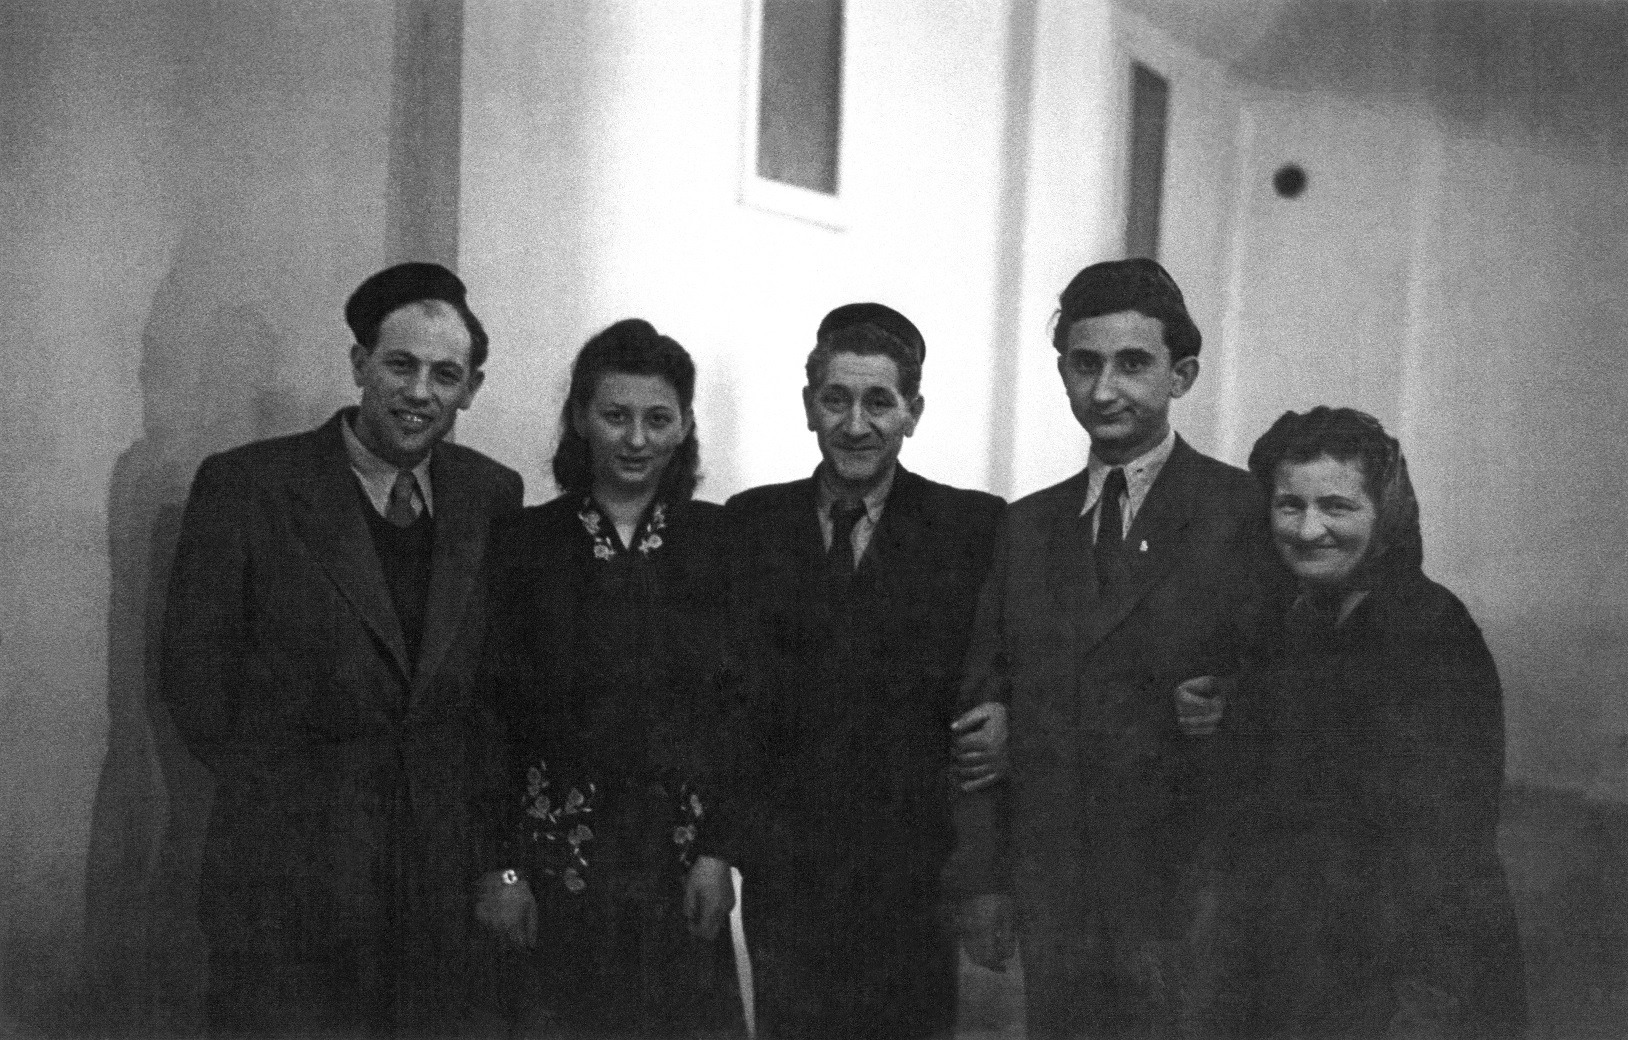 Passover 1947 in the synagogue: Samuel Mandelbaum, second from right. Collection Jewish Community Wiesbaden